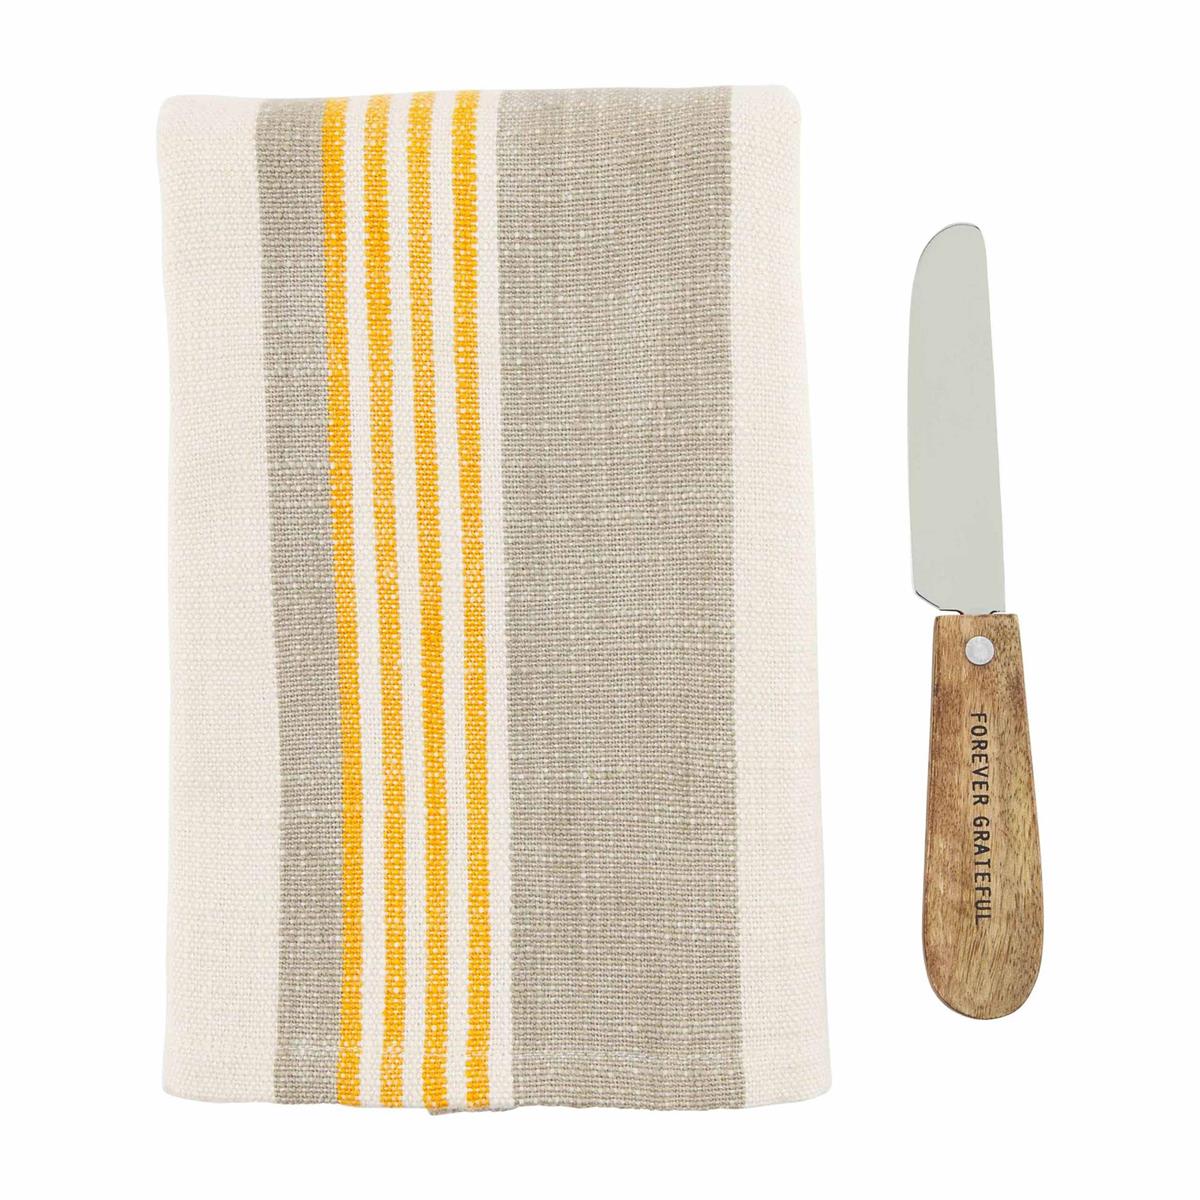 Rustic Fall Kitchen Towels and Spreader Set